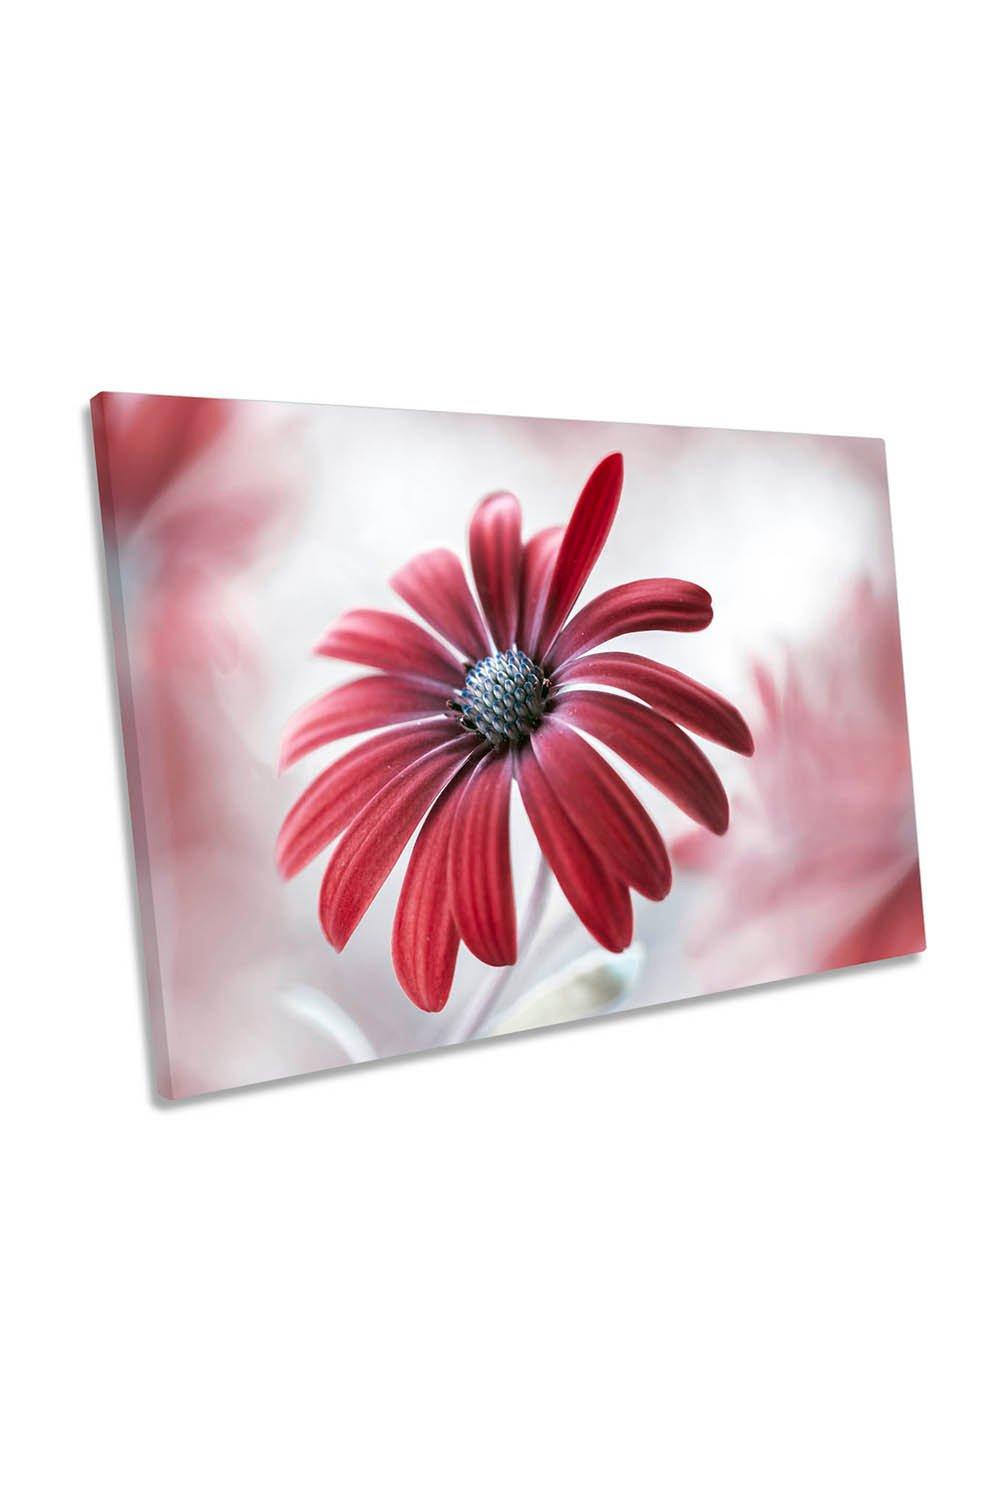 Red Daisy Flower Floral Canvas Wall Art Picture Print